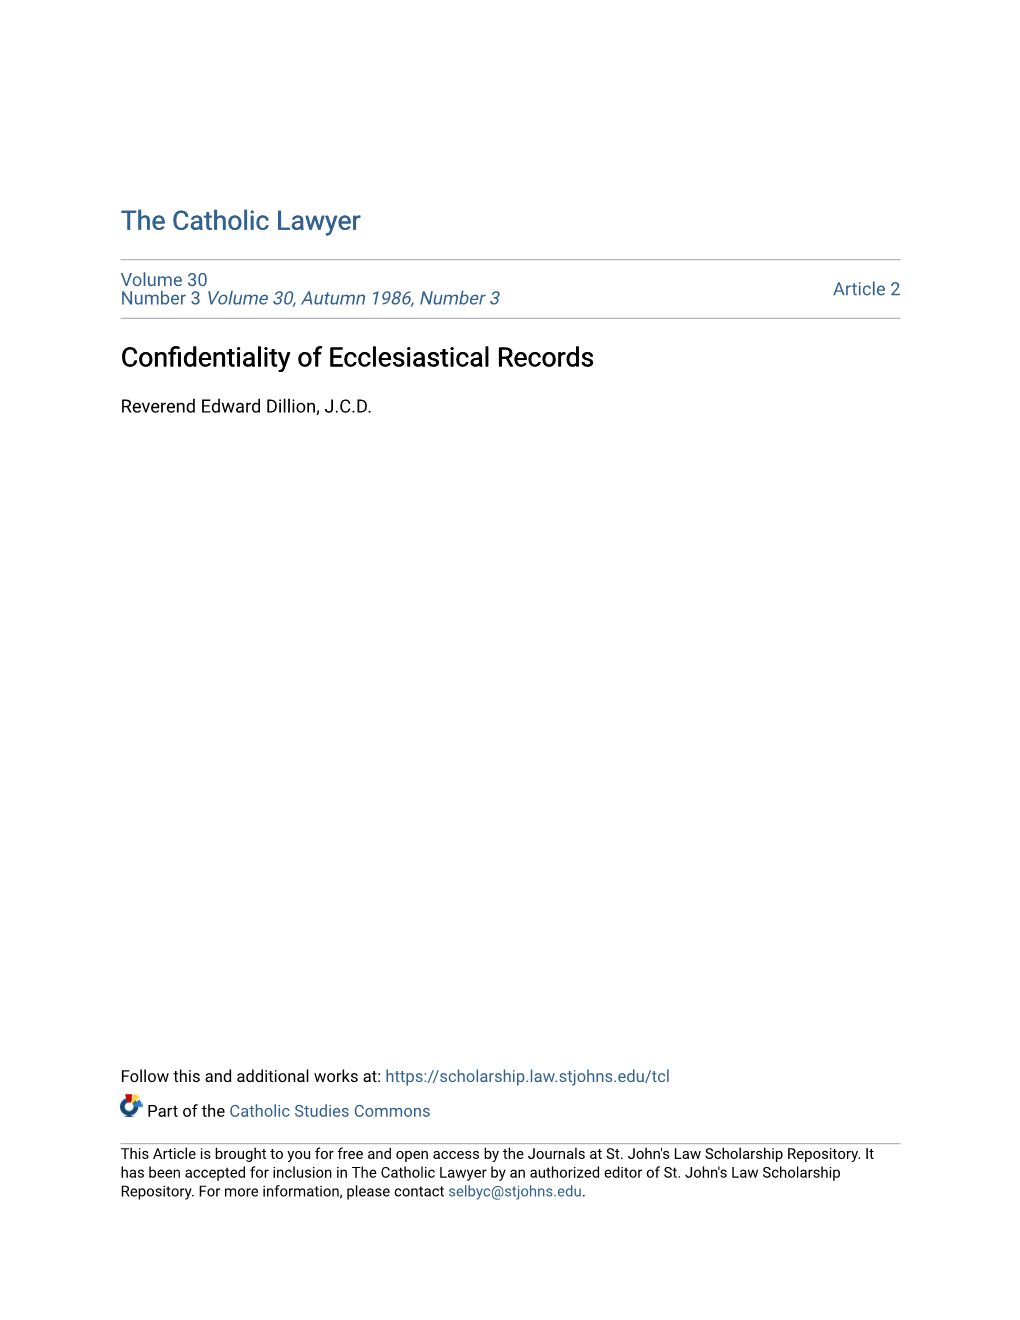 CONFIDENTIALITY of ECCLESIASTICAL Recordst